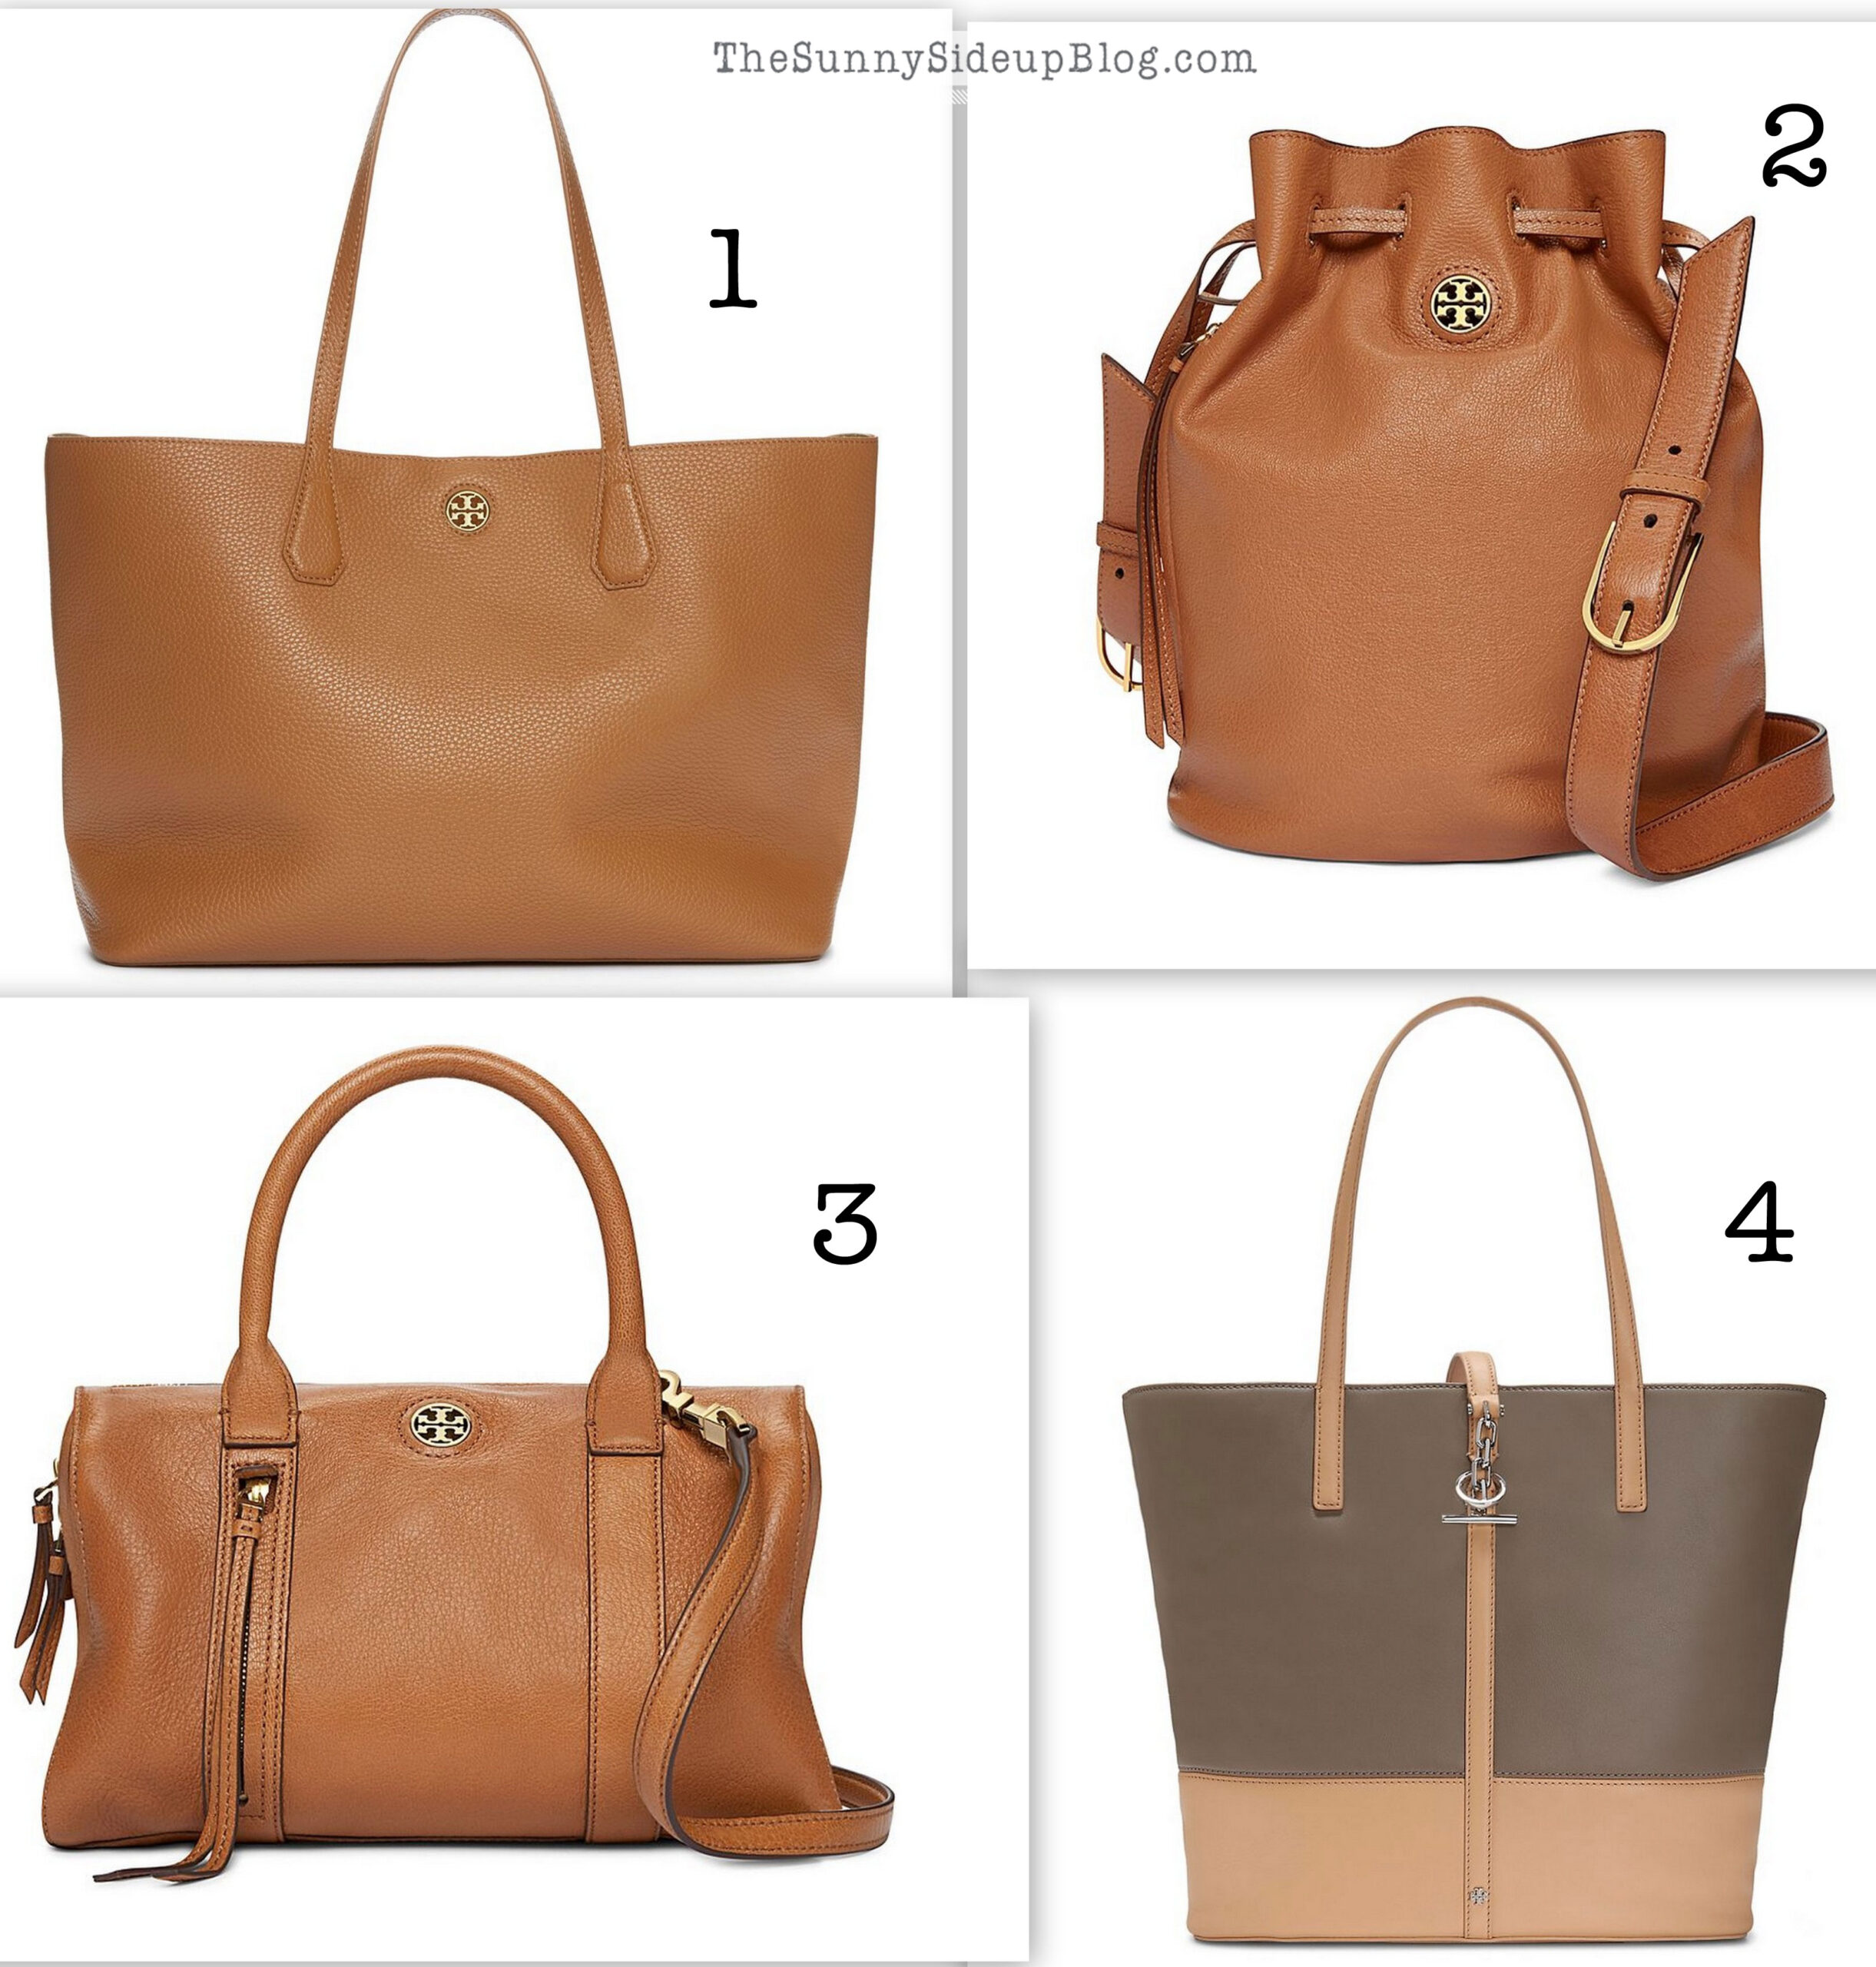 Favorite handbags for Fall - The Sunny Side Up Blog